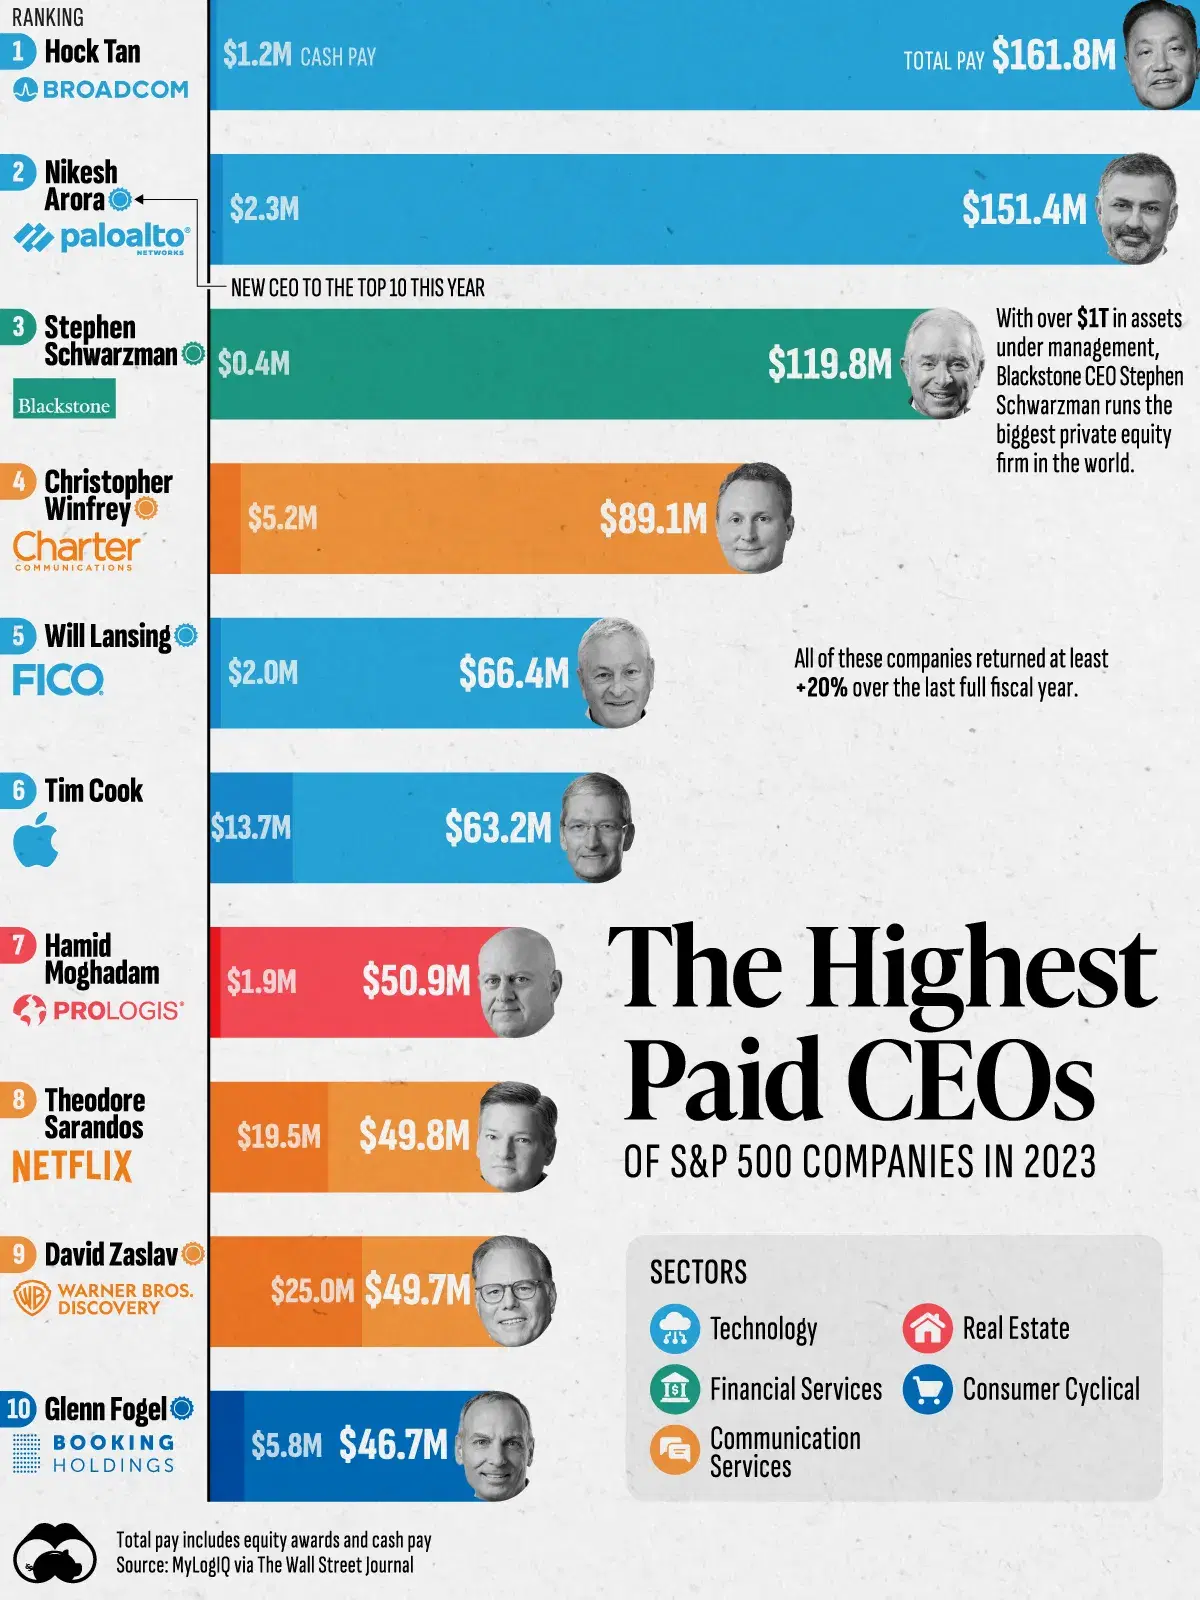 The Highest Paid CEOs of S&P 500 Companies